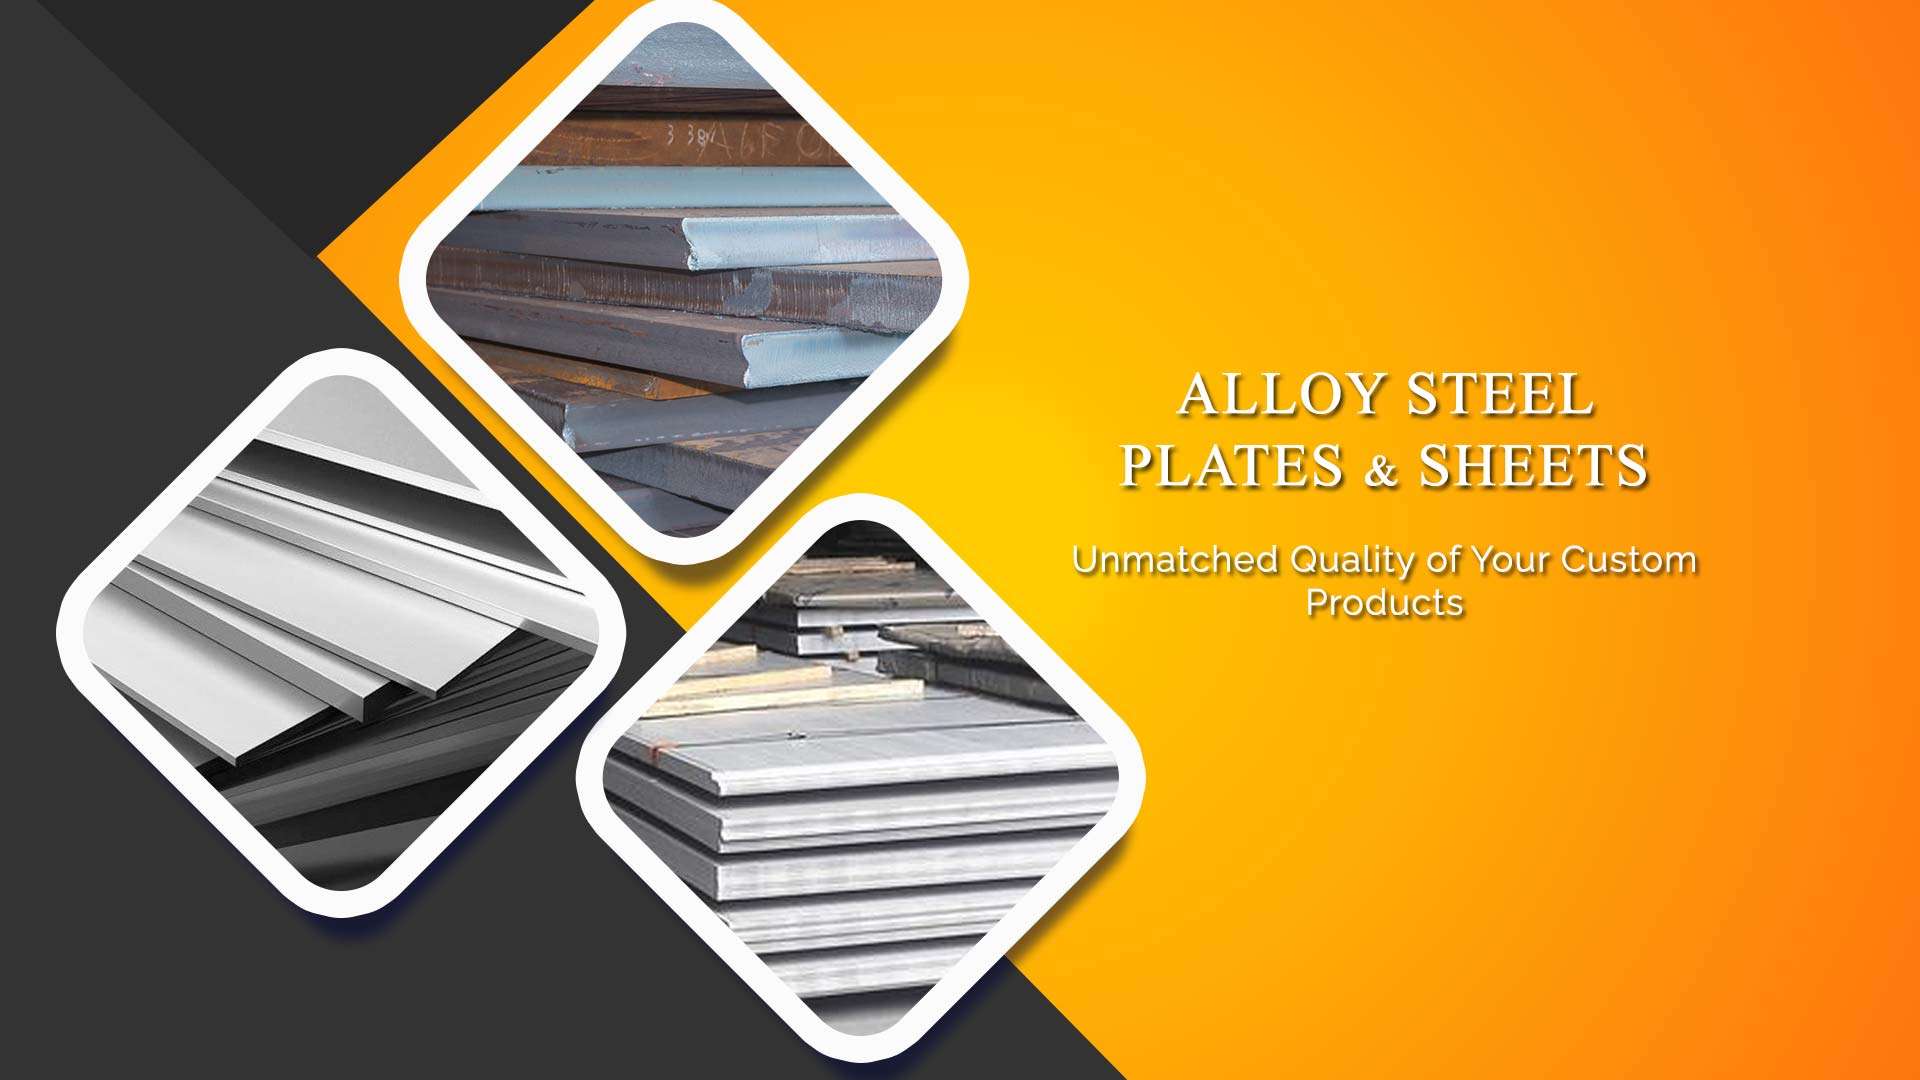 Alloy Steel Plates And Sheets in Mumbai